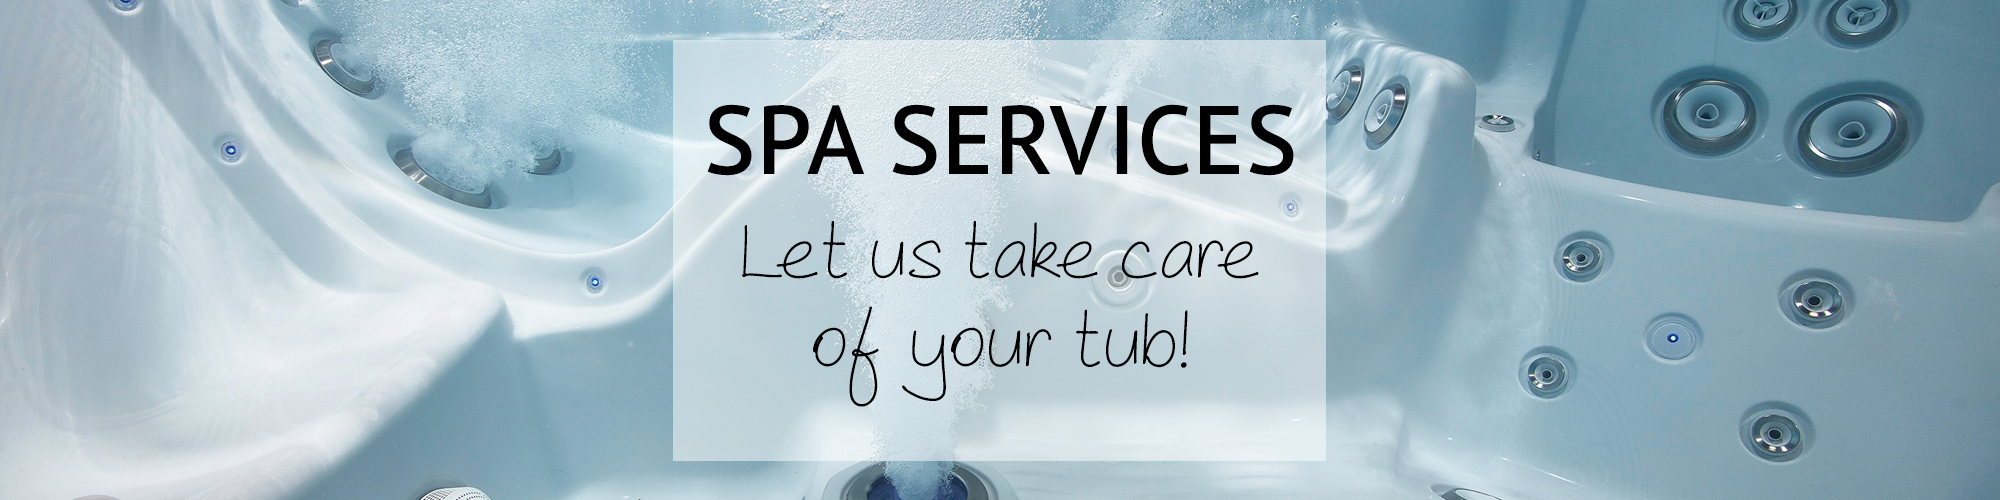 spa services banner